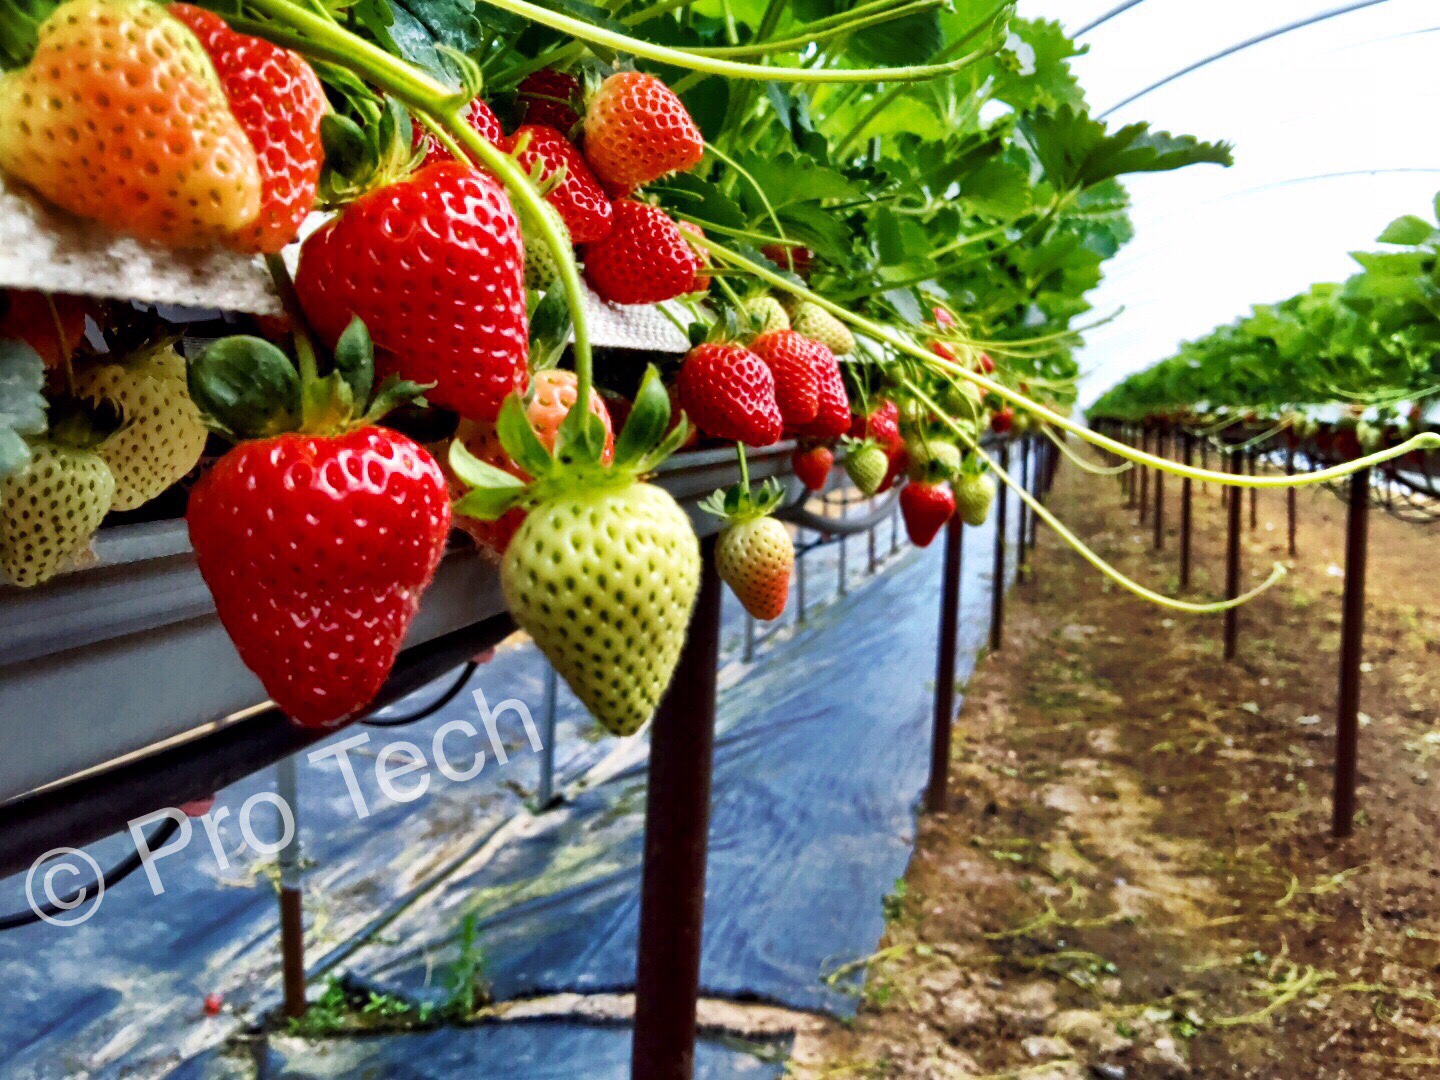 Fruit Focus, Protech growing systems, flat sided oval tube, commercial greenhouse, greenhouse polythene, growing systems, farming innovations, suspended strawberries tabletops, polythene repair tape, oval tube multi bay tunnels, strawberry Spanish Tunnels, 